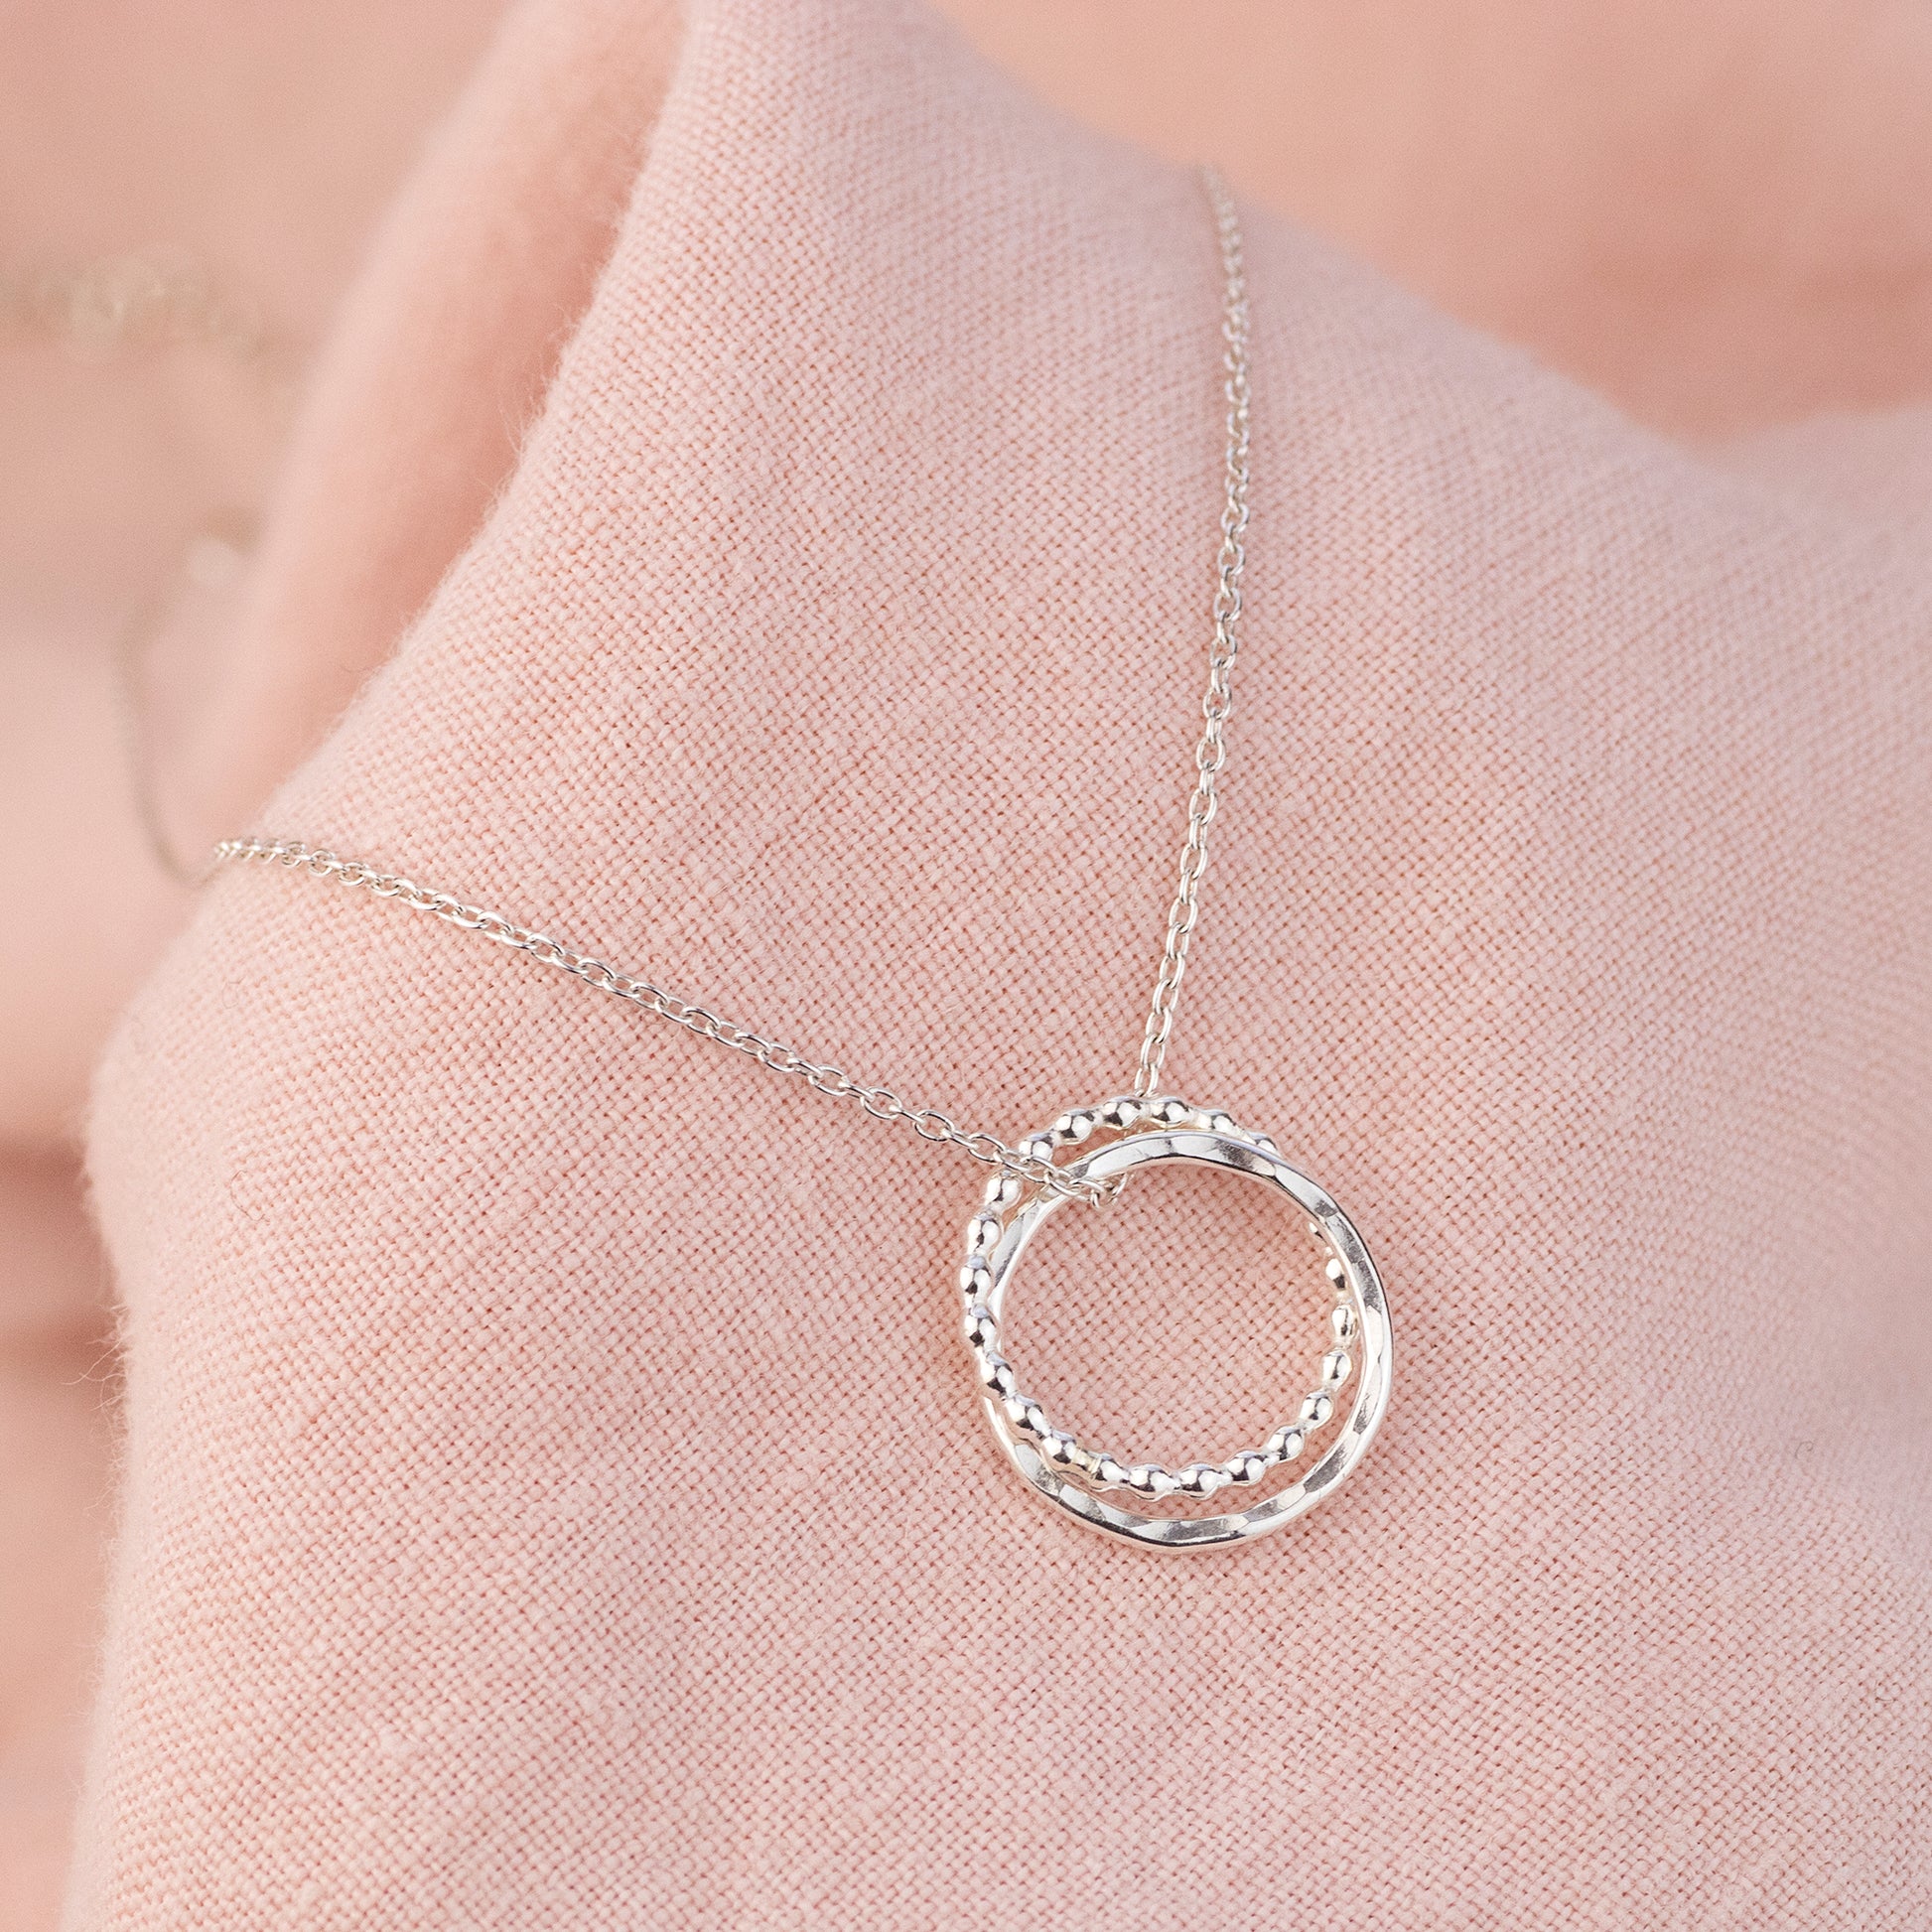 Aunt & Niece Necklace - Linked for a Lifetime - Silver